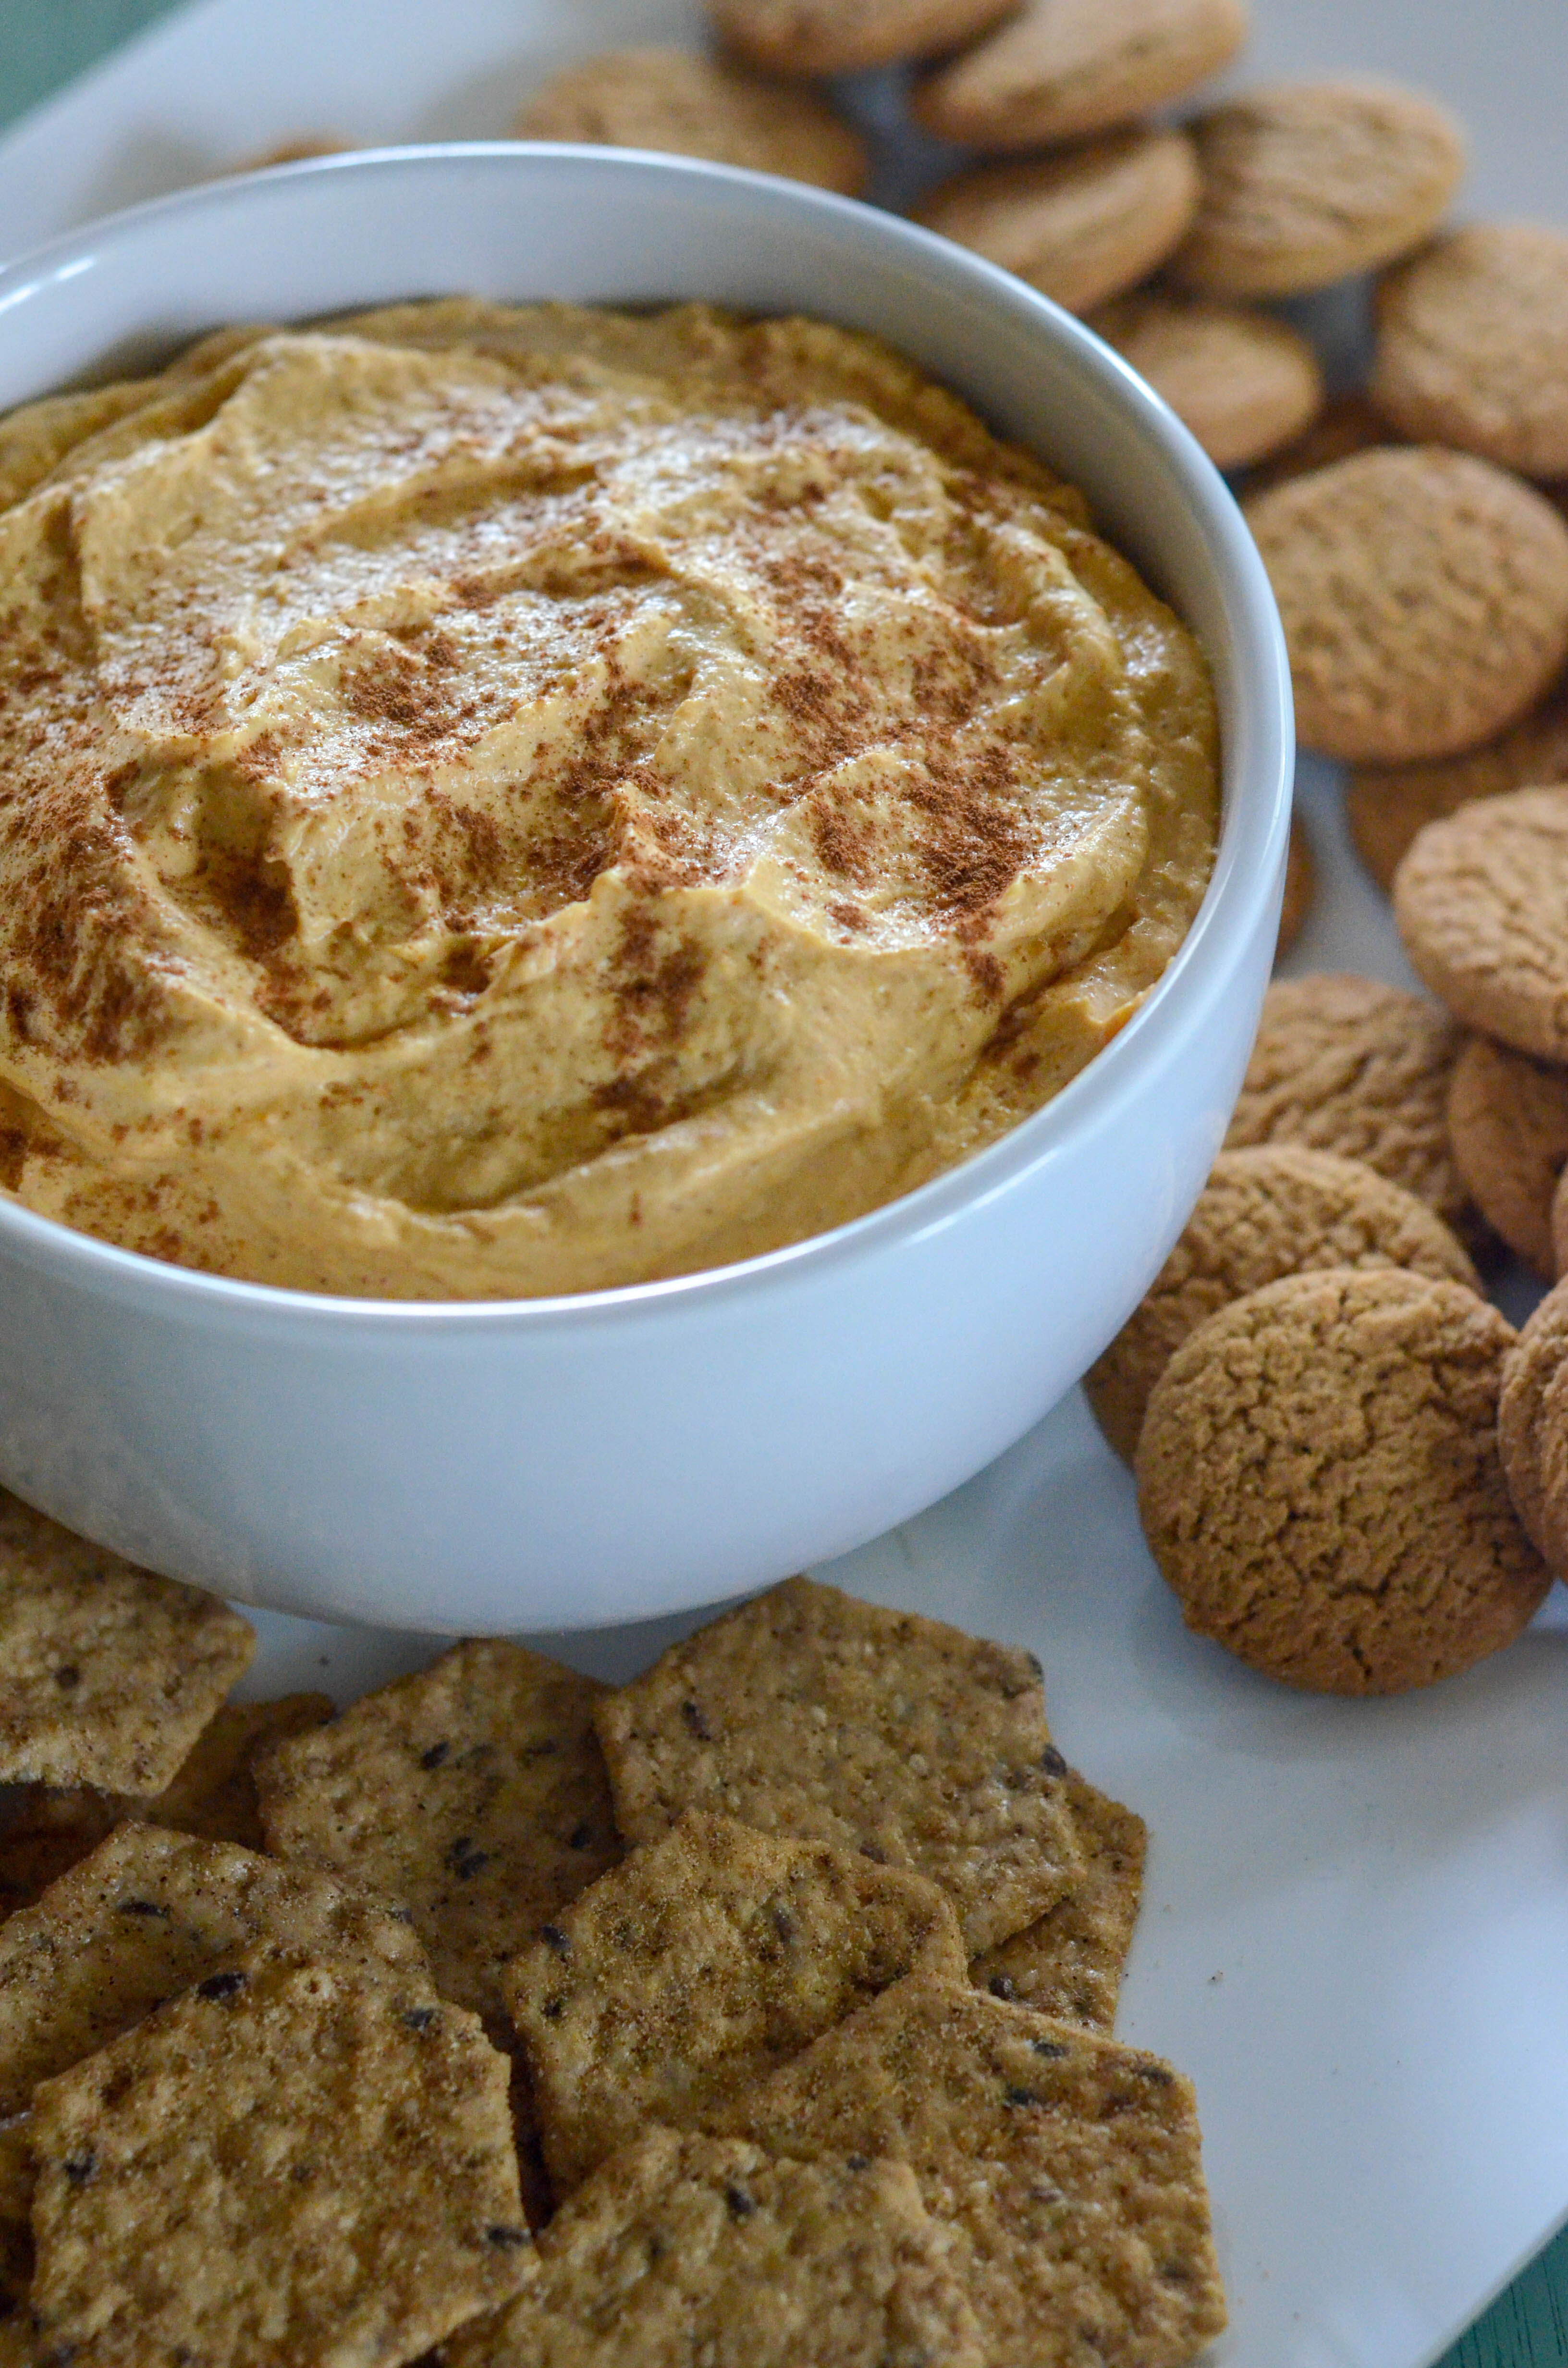 This 10-minute Pumpkin Dip is fast and simple AND tastes like pumpkin pie! - #pumpkinpie dip #pumpkinrecipe #falldesserts - The Gifted Gabber